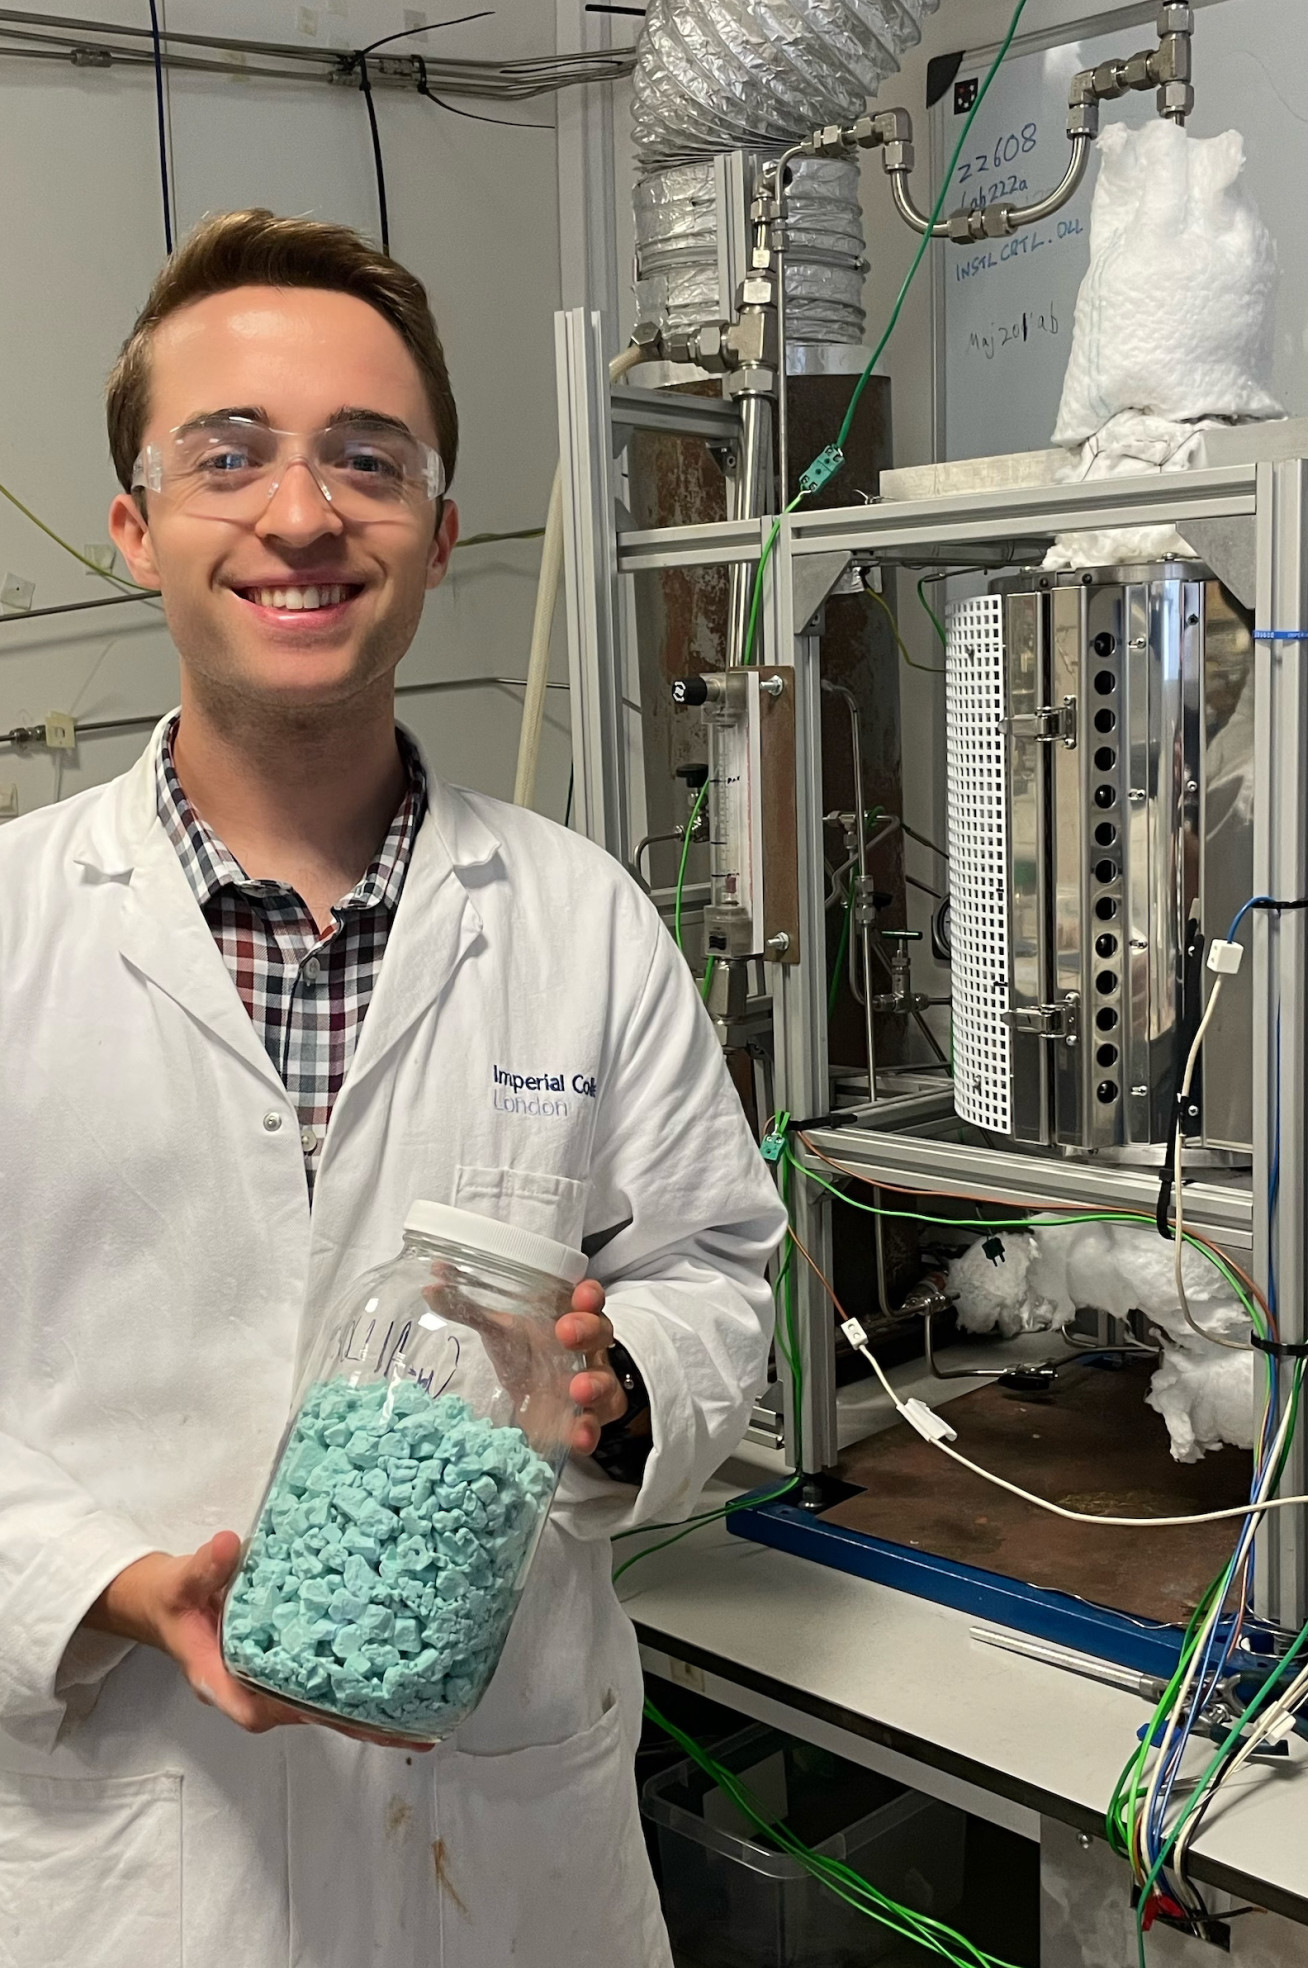 Lead author and PhD candidate Michael High smiles as he holds up a jar of the materials needed for redox reactions